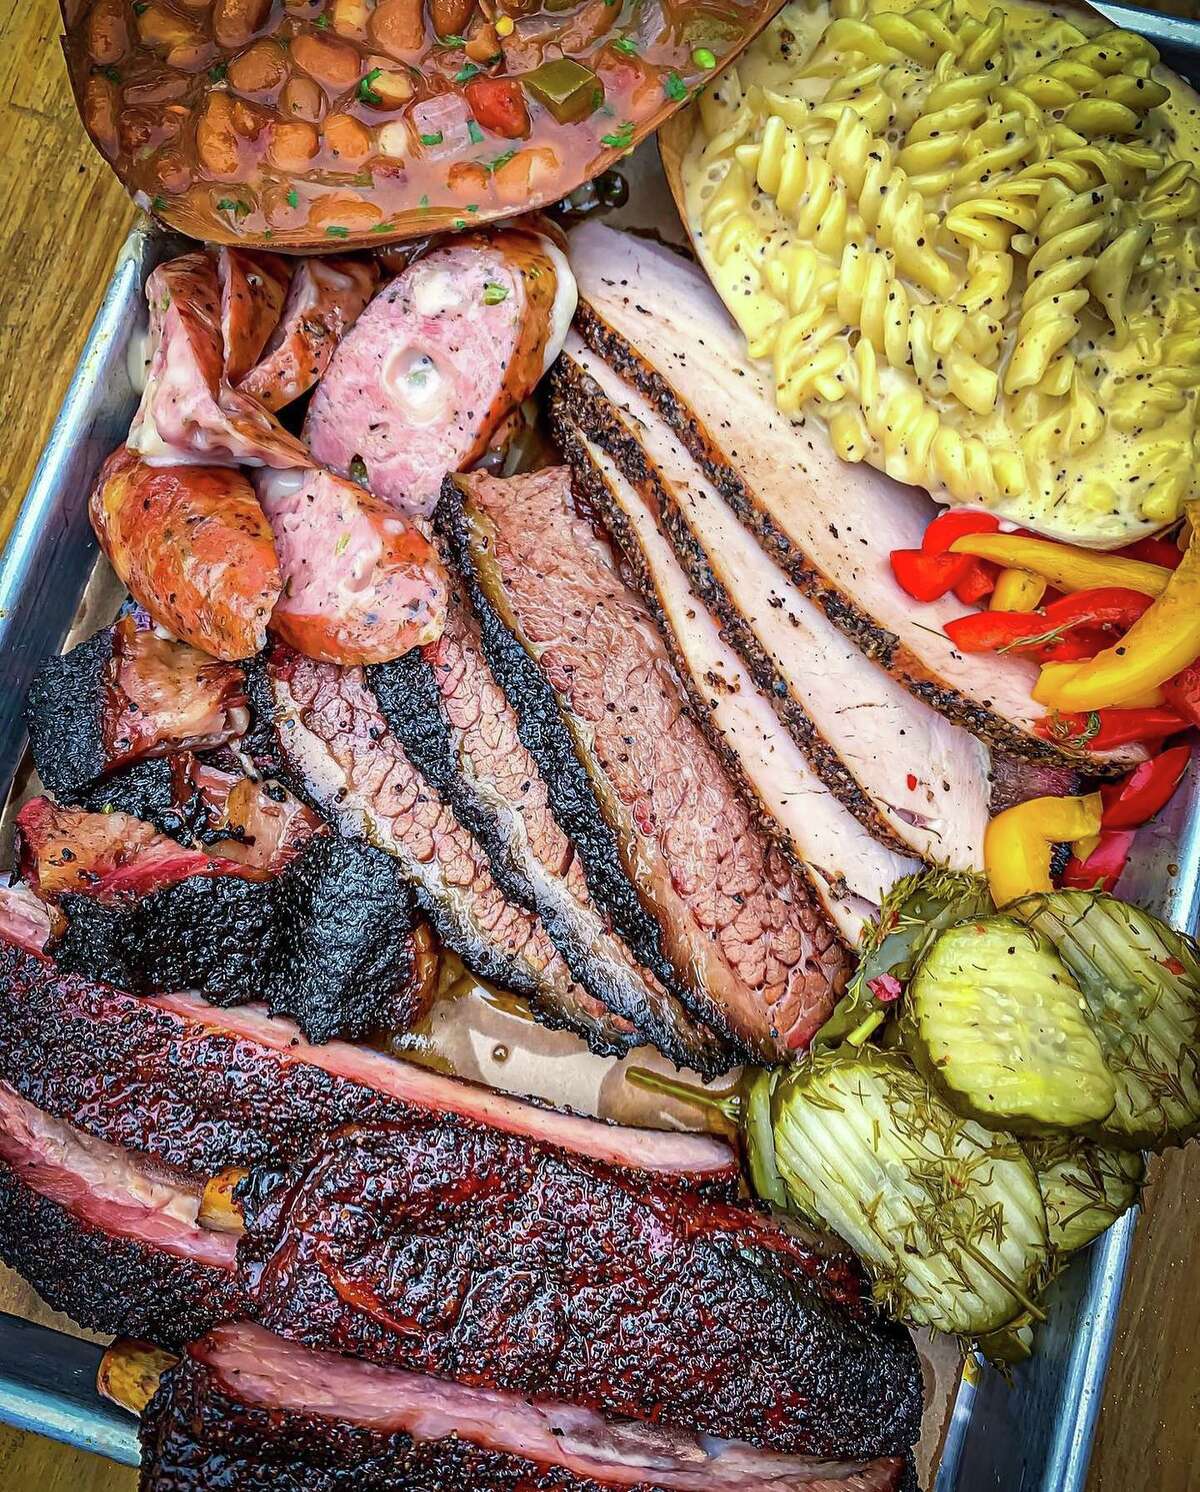 A variety of barbecue meats and sides from 2M Smokehouse.